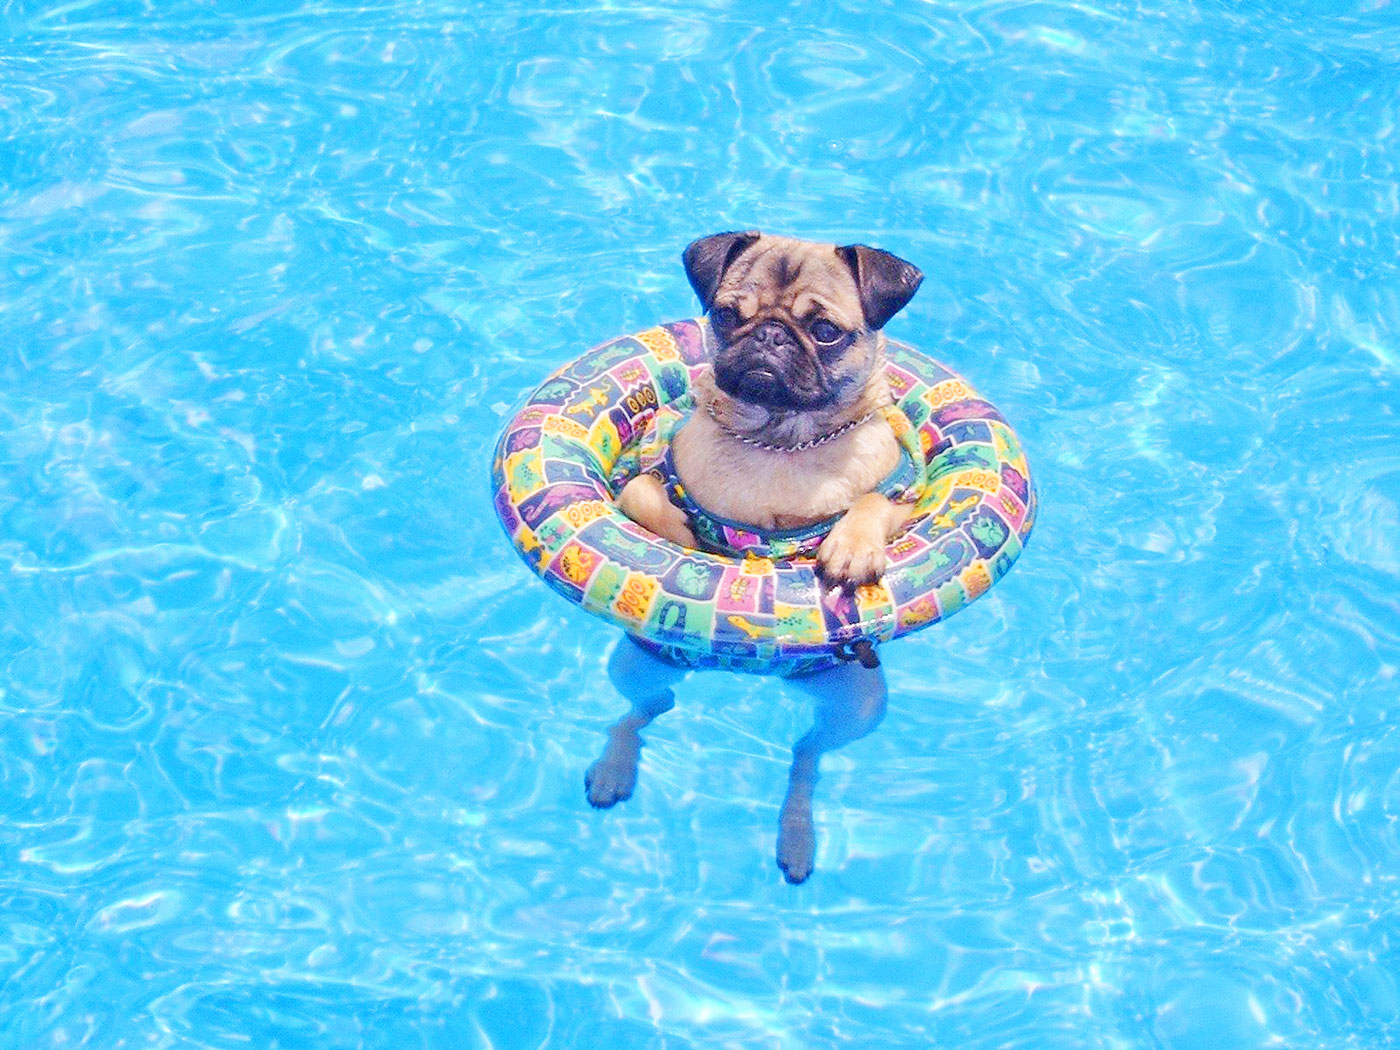 Dogs and pools: a joyful (but expensive) mix - Cayman Compass